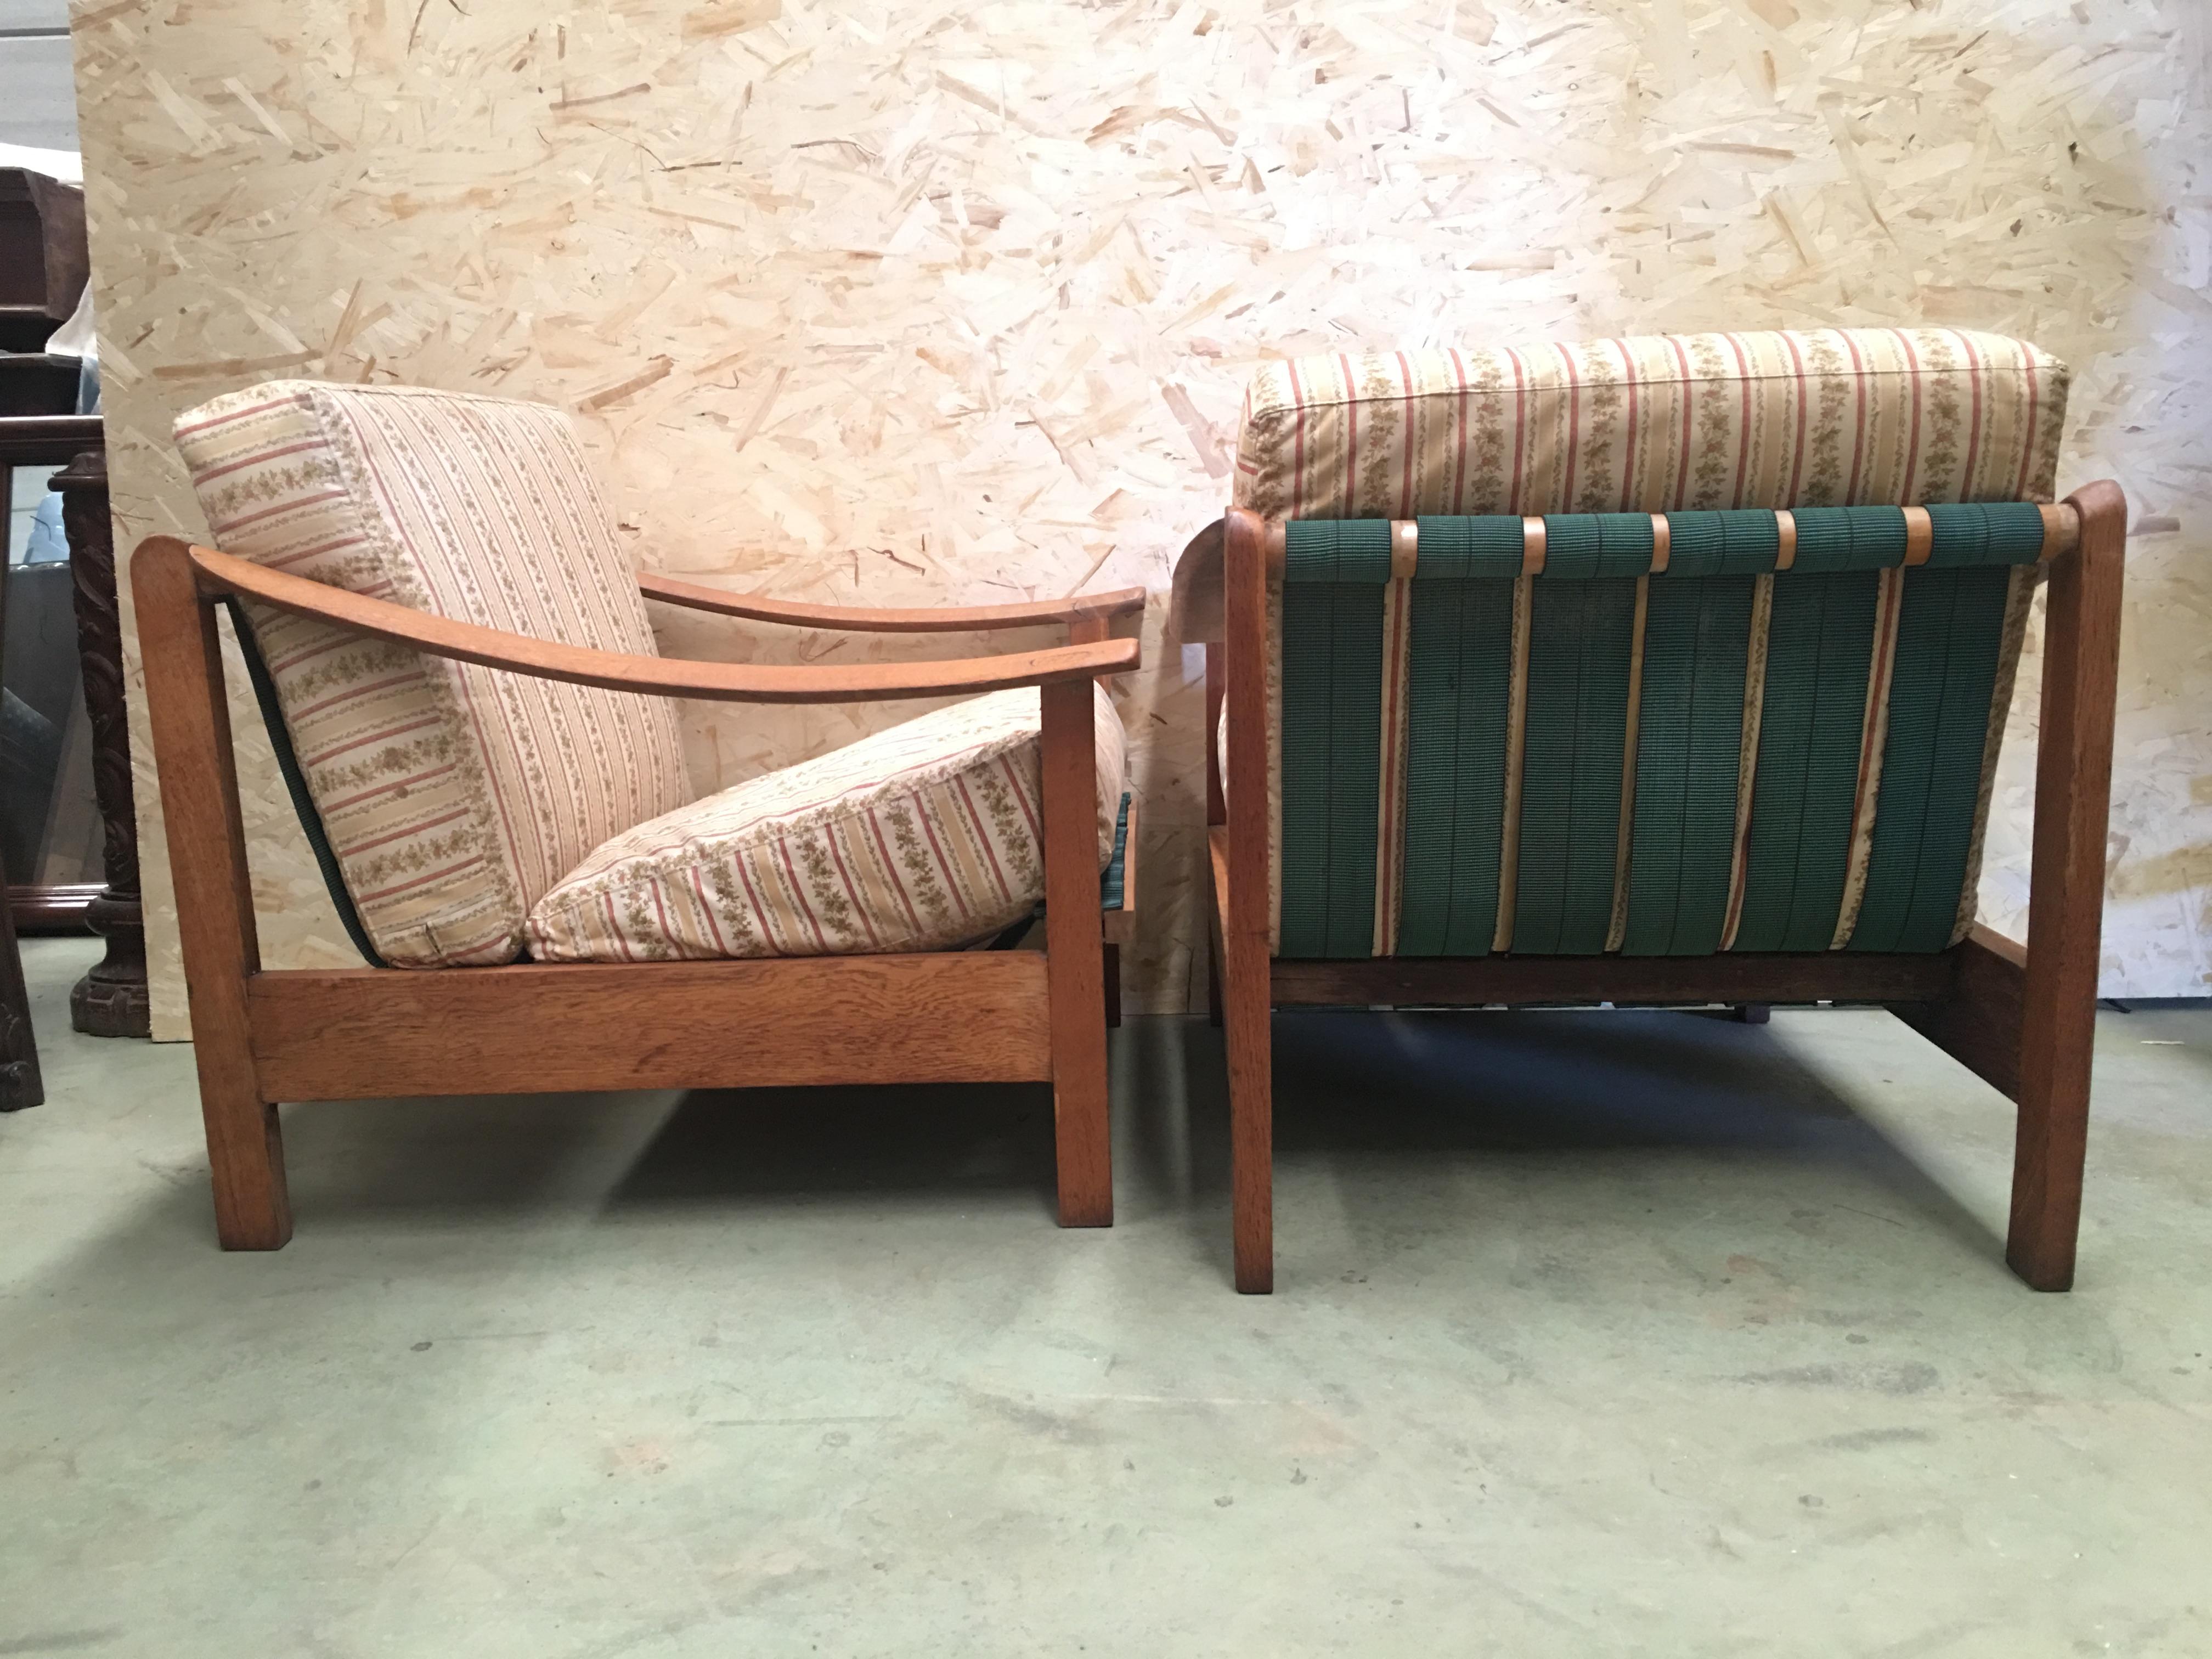 20th Century Vintage Danish Teak Armchairs with Straps and Cushions In Good Condition For Sale In Miami, FL